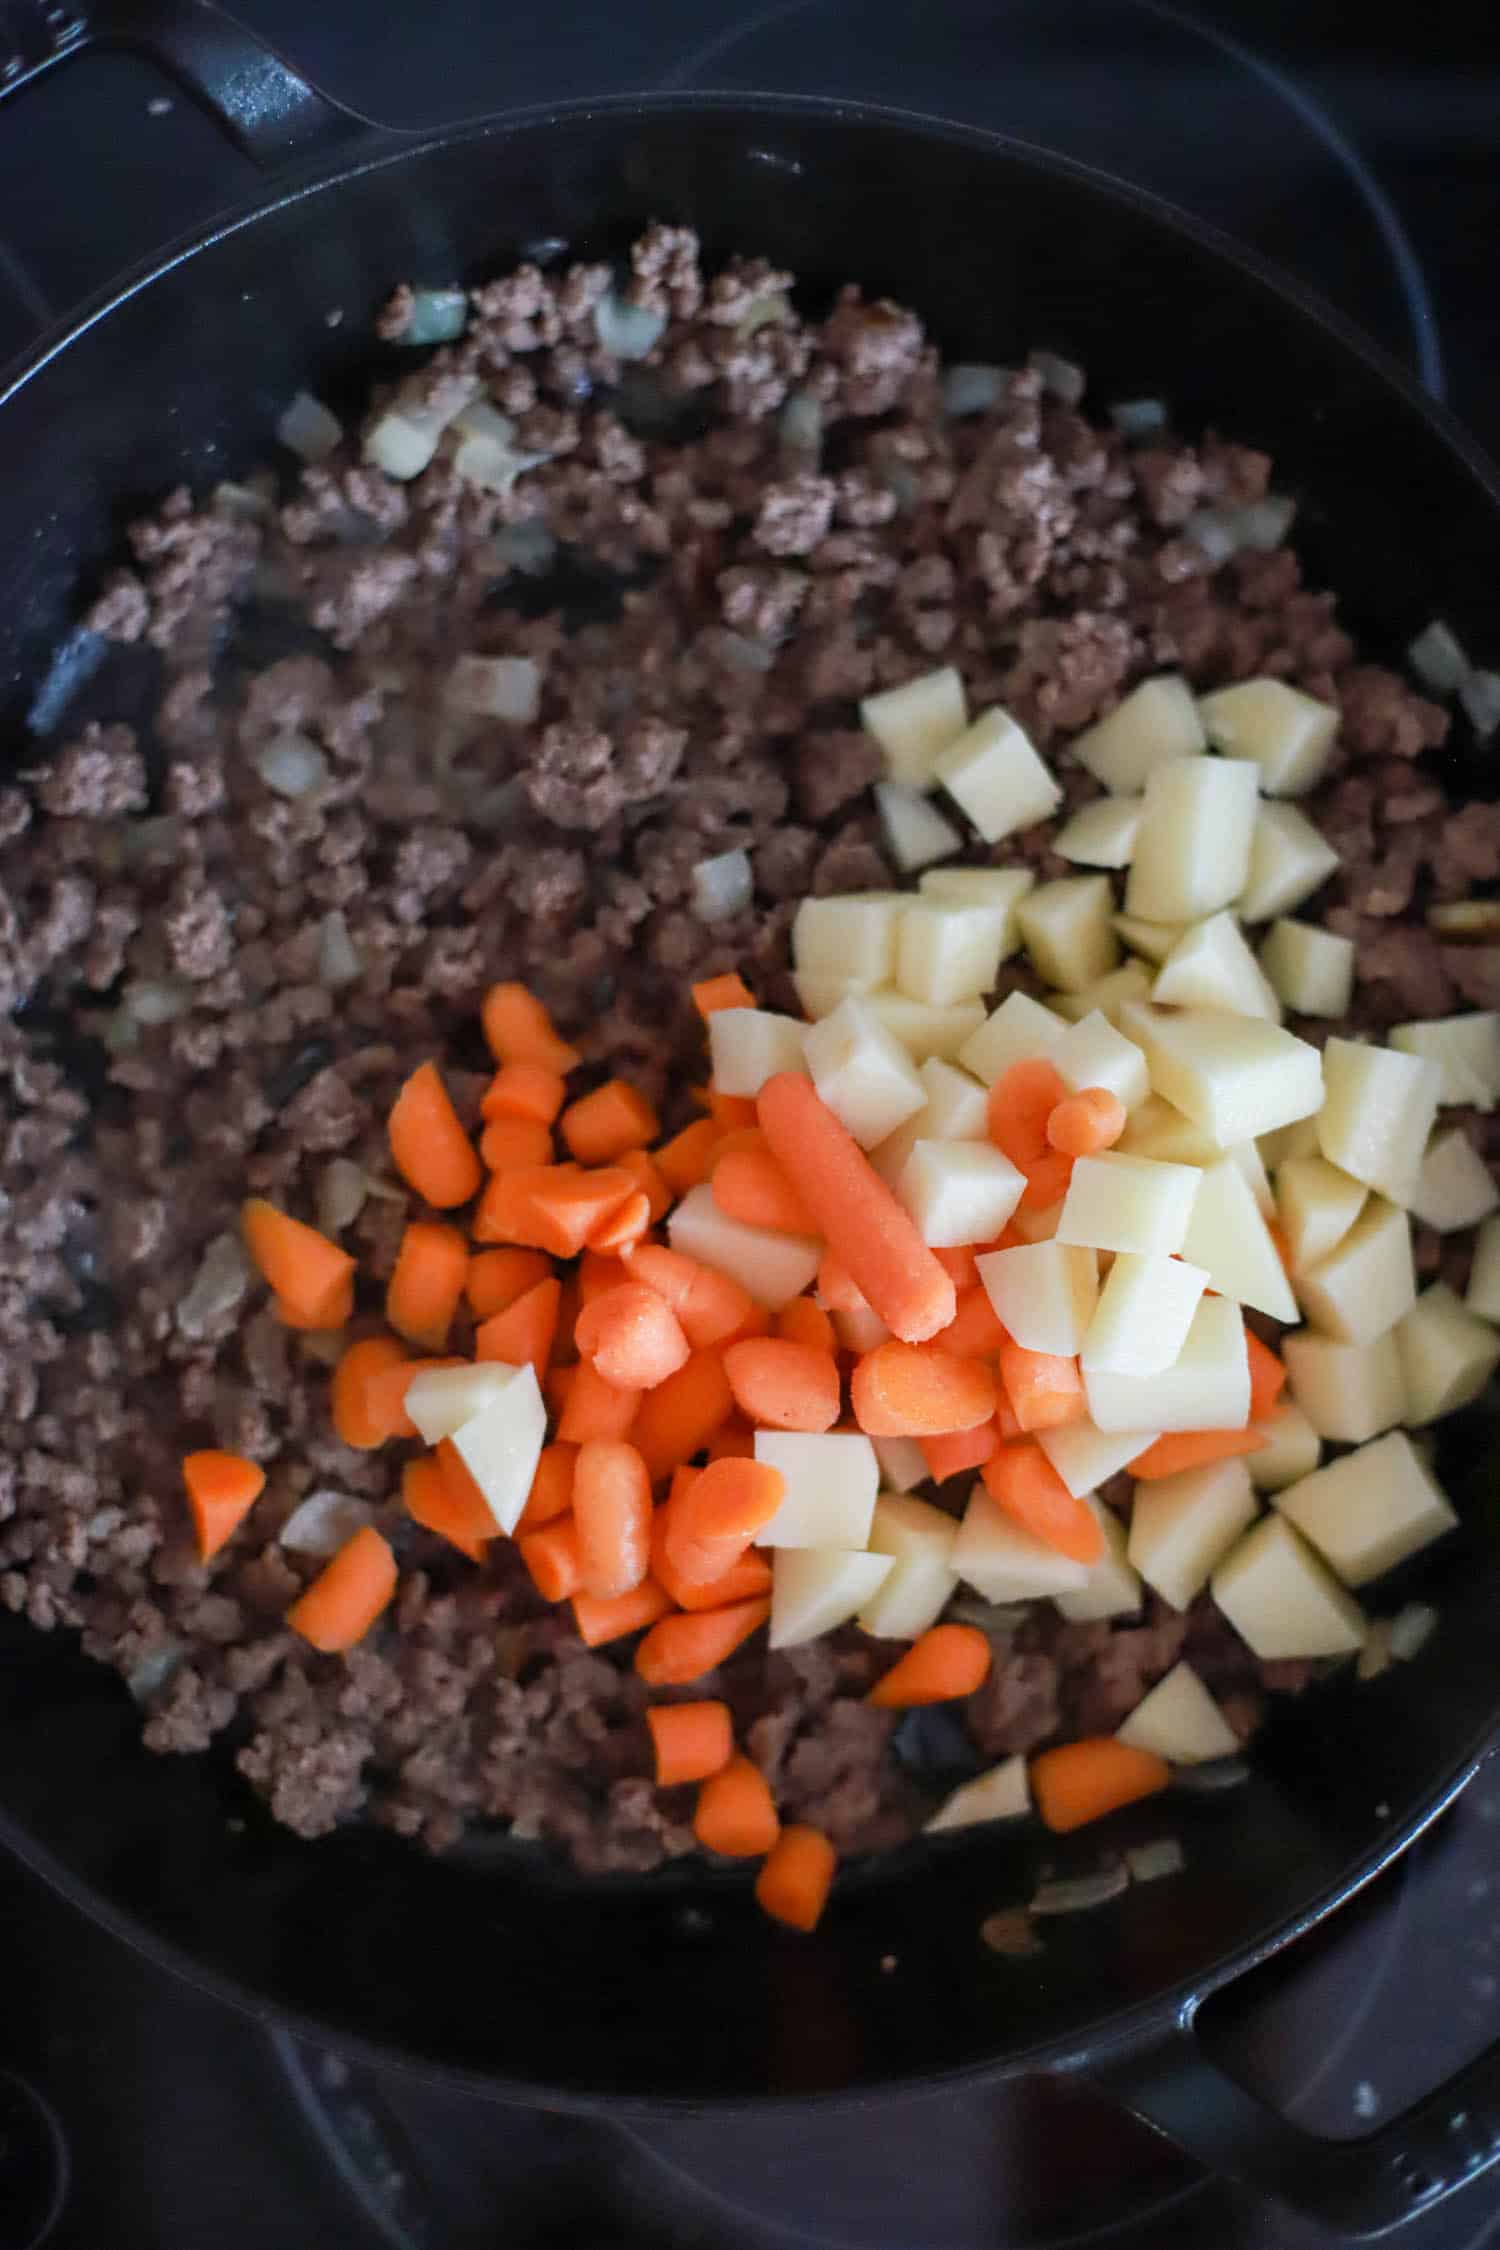 Carrots and potatoes on top of ground beef in a large black skillet.